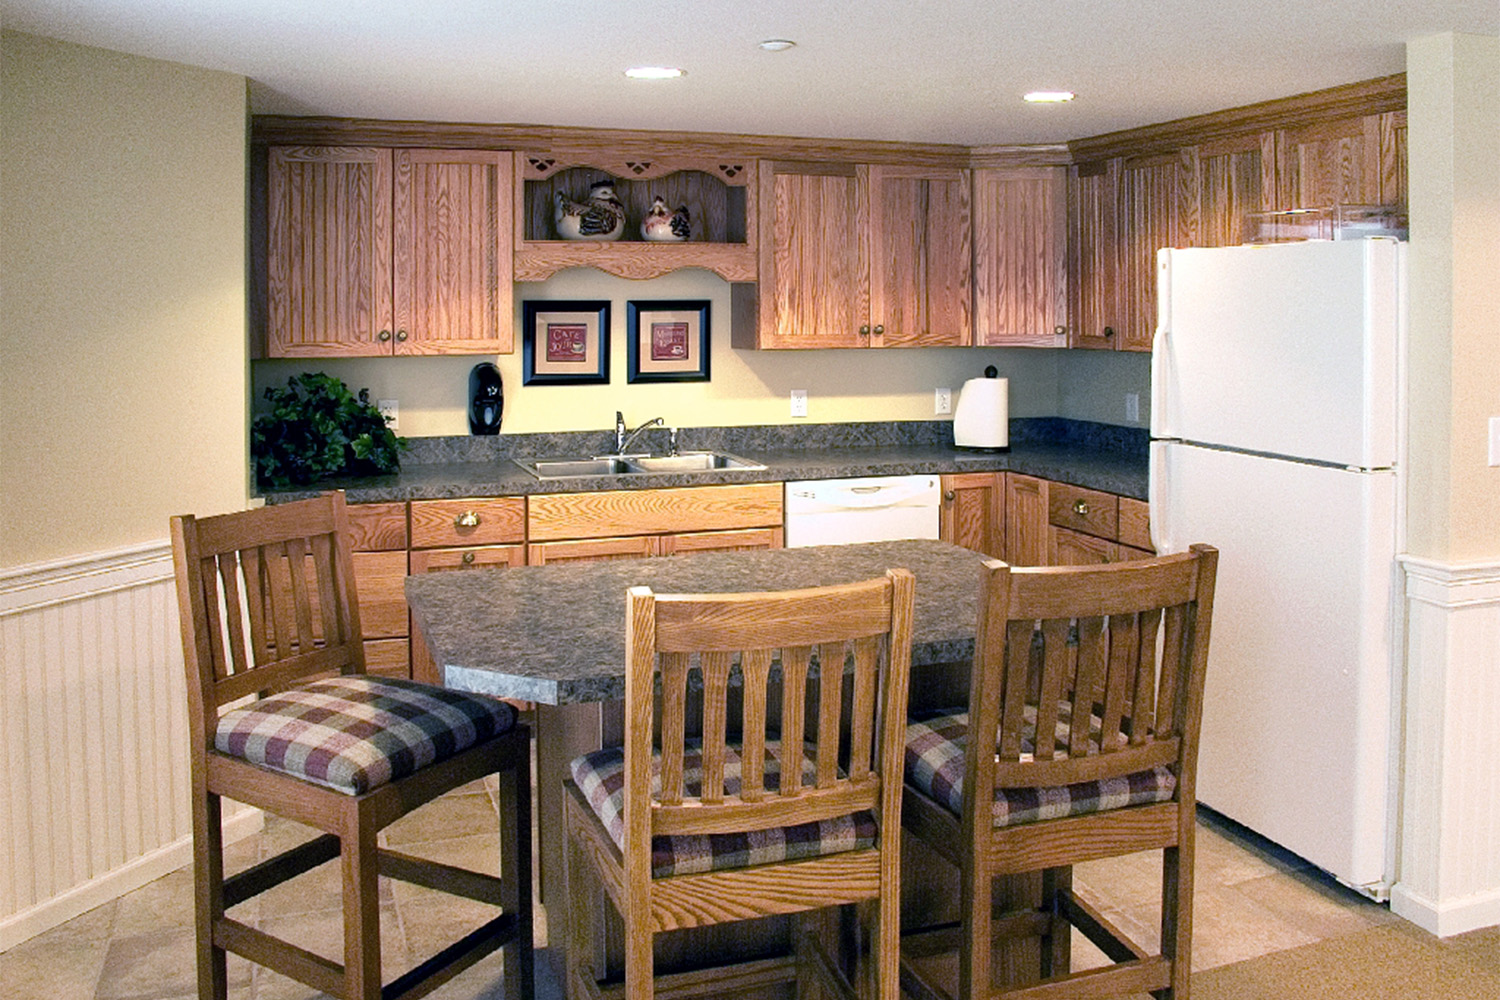 kitchen and dining area with wooden cabinets and white refrigerator 